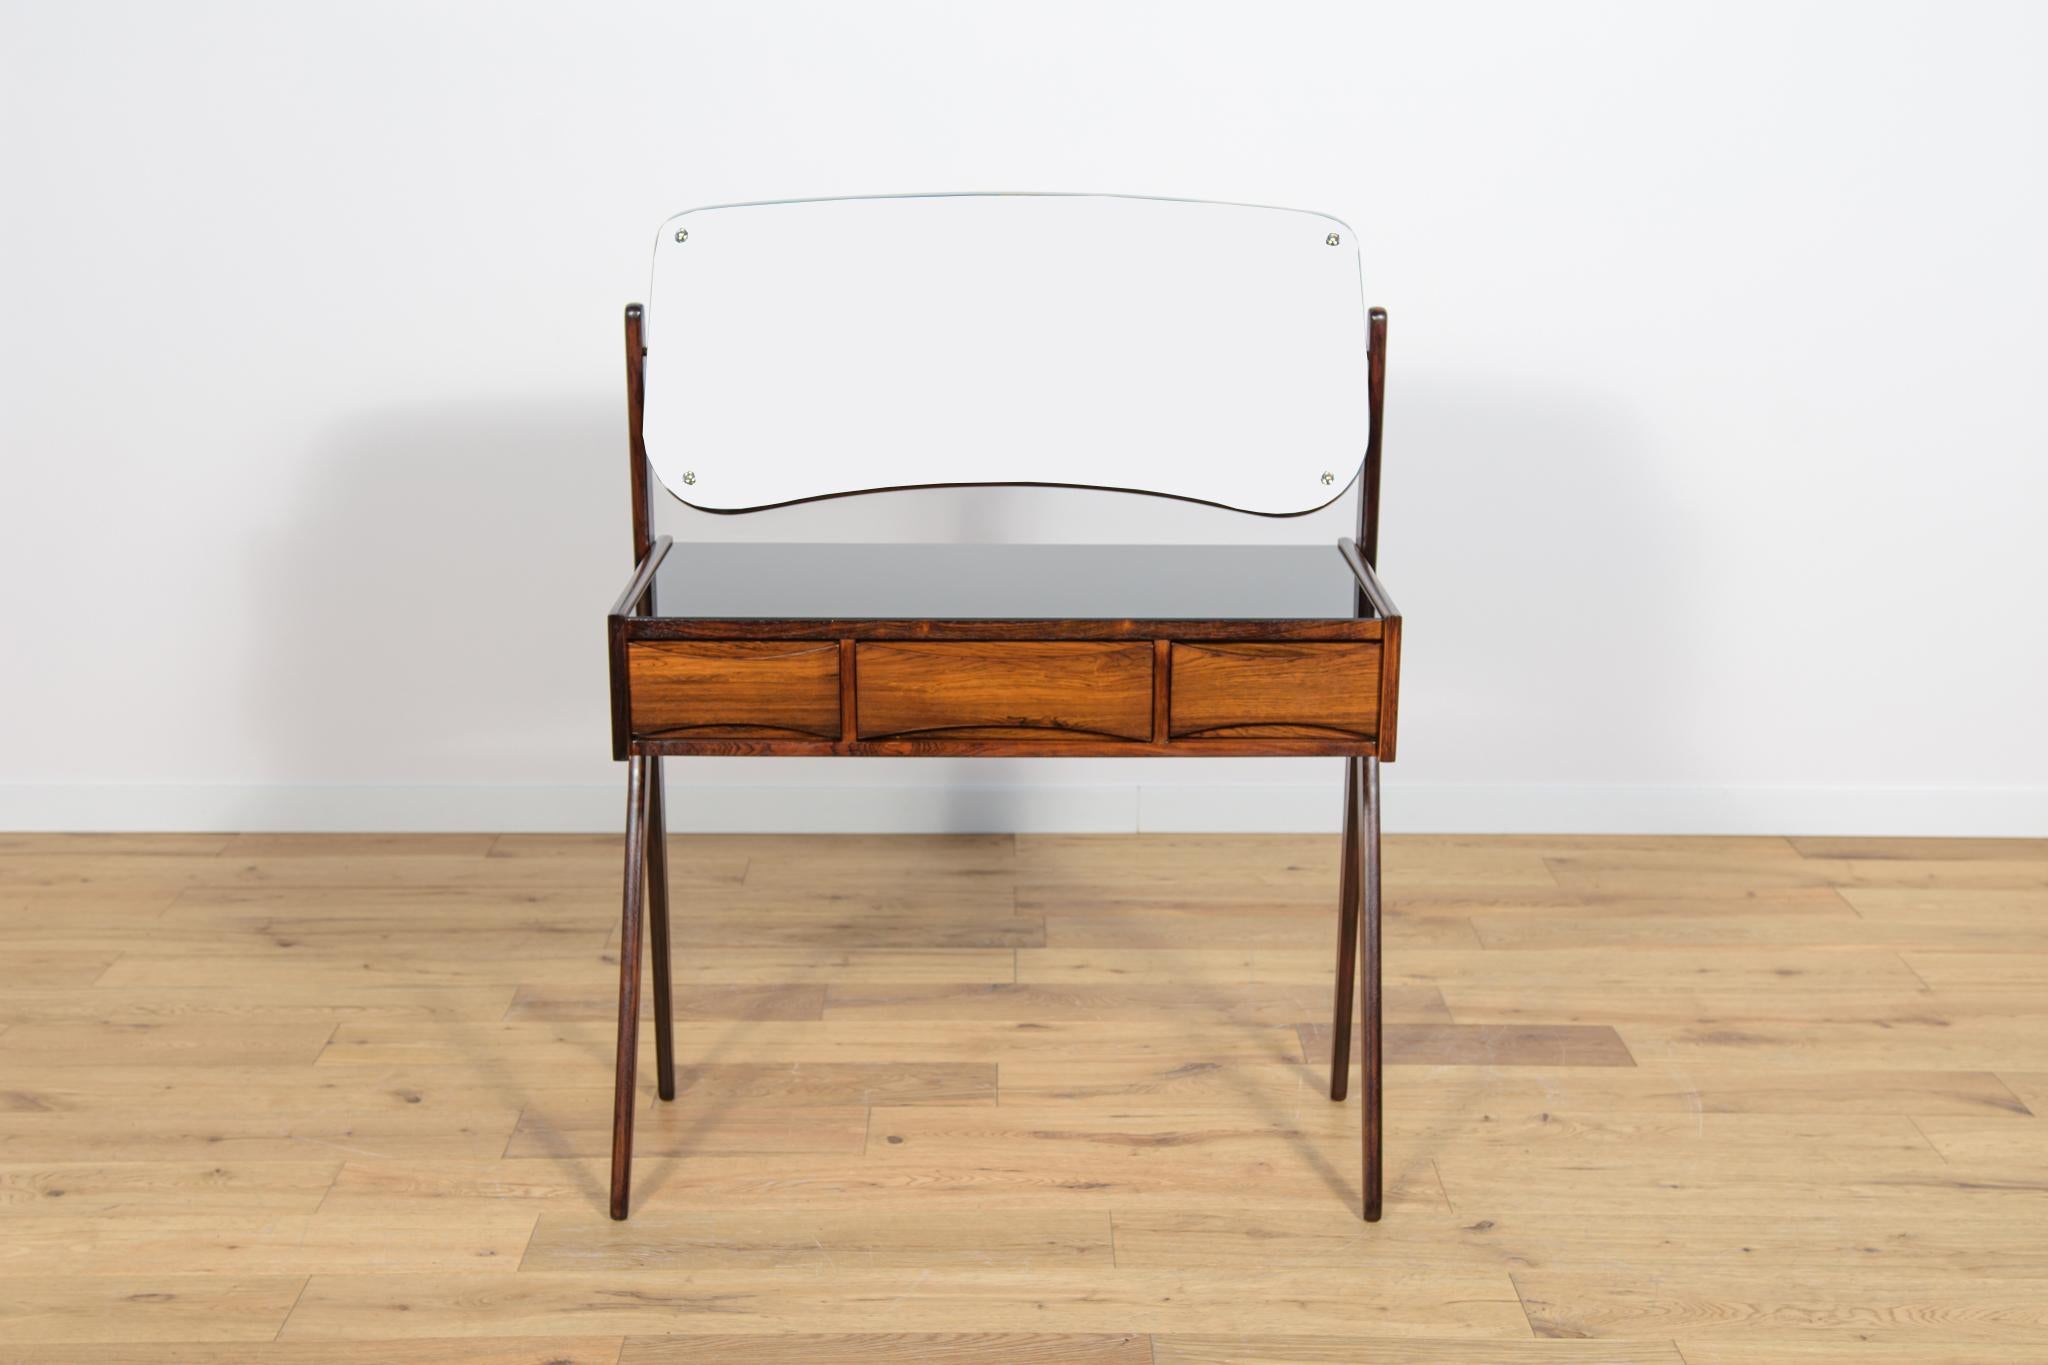 A small rosewood dressing table designed by Arne Vodder for Ølholm Møbelfabrik. The dressing table has three drawers. There is an adjustable mirror in the frame above the dressing table. The furniture has been completely renovated, it has been